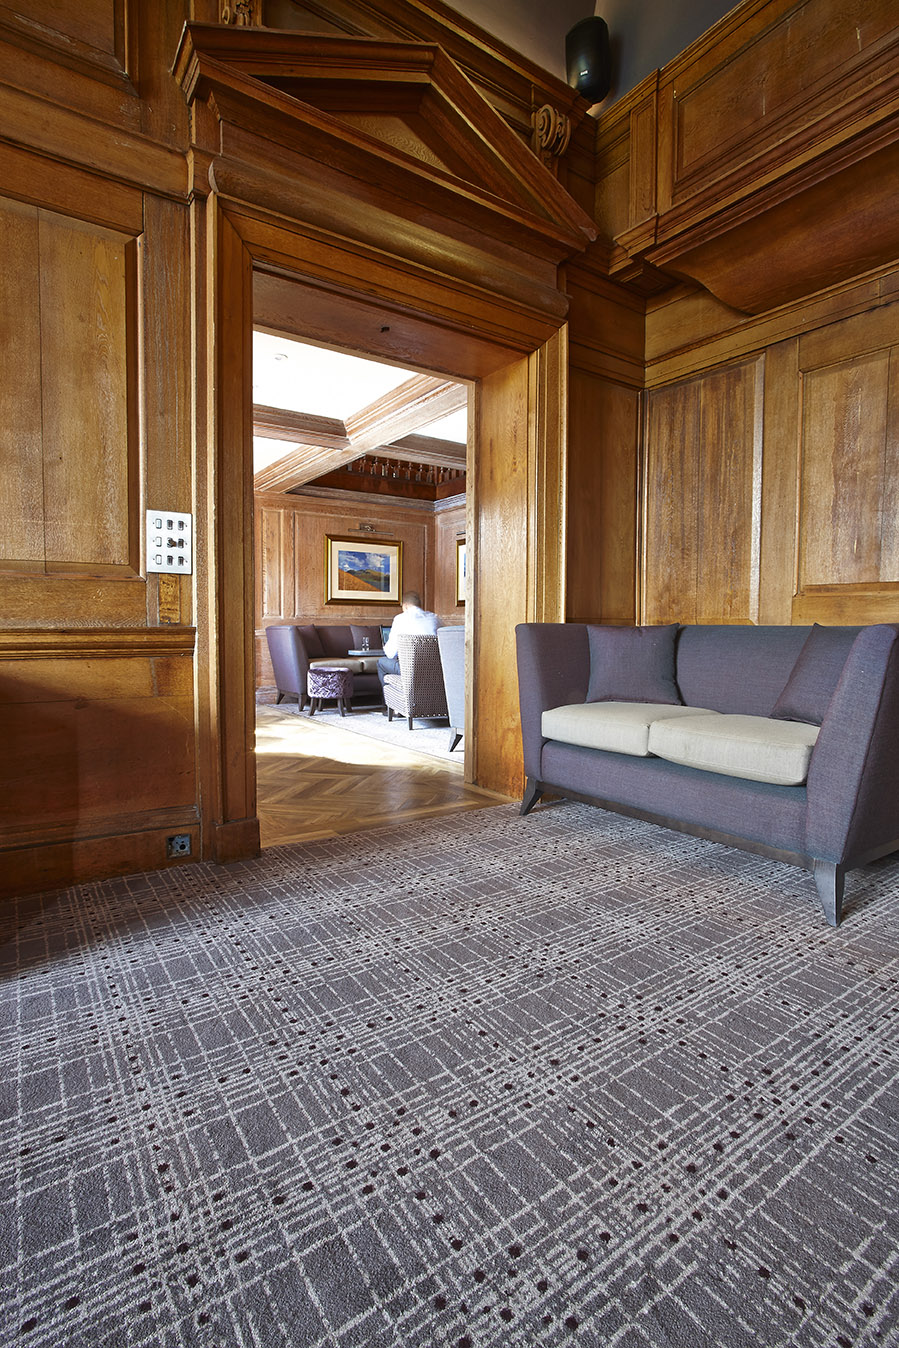 Abbey House Hotel bespoke lounge area carpet, with grey and cream strips, designed by Wilton Carpets